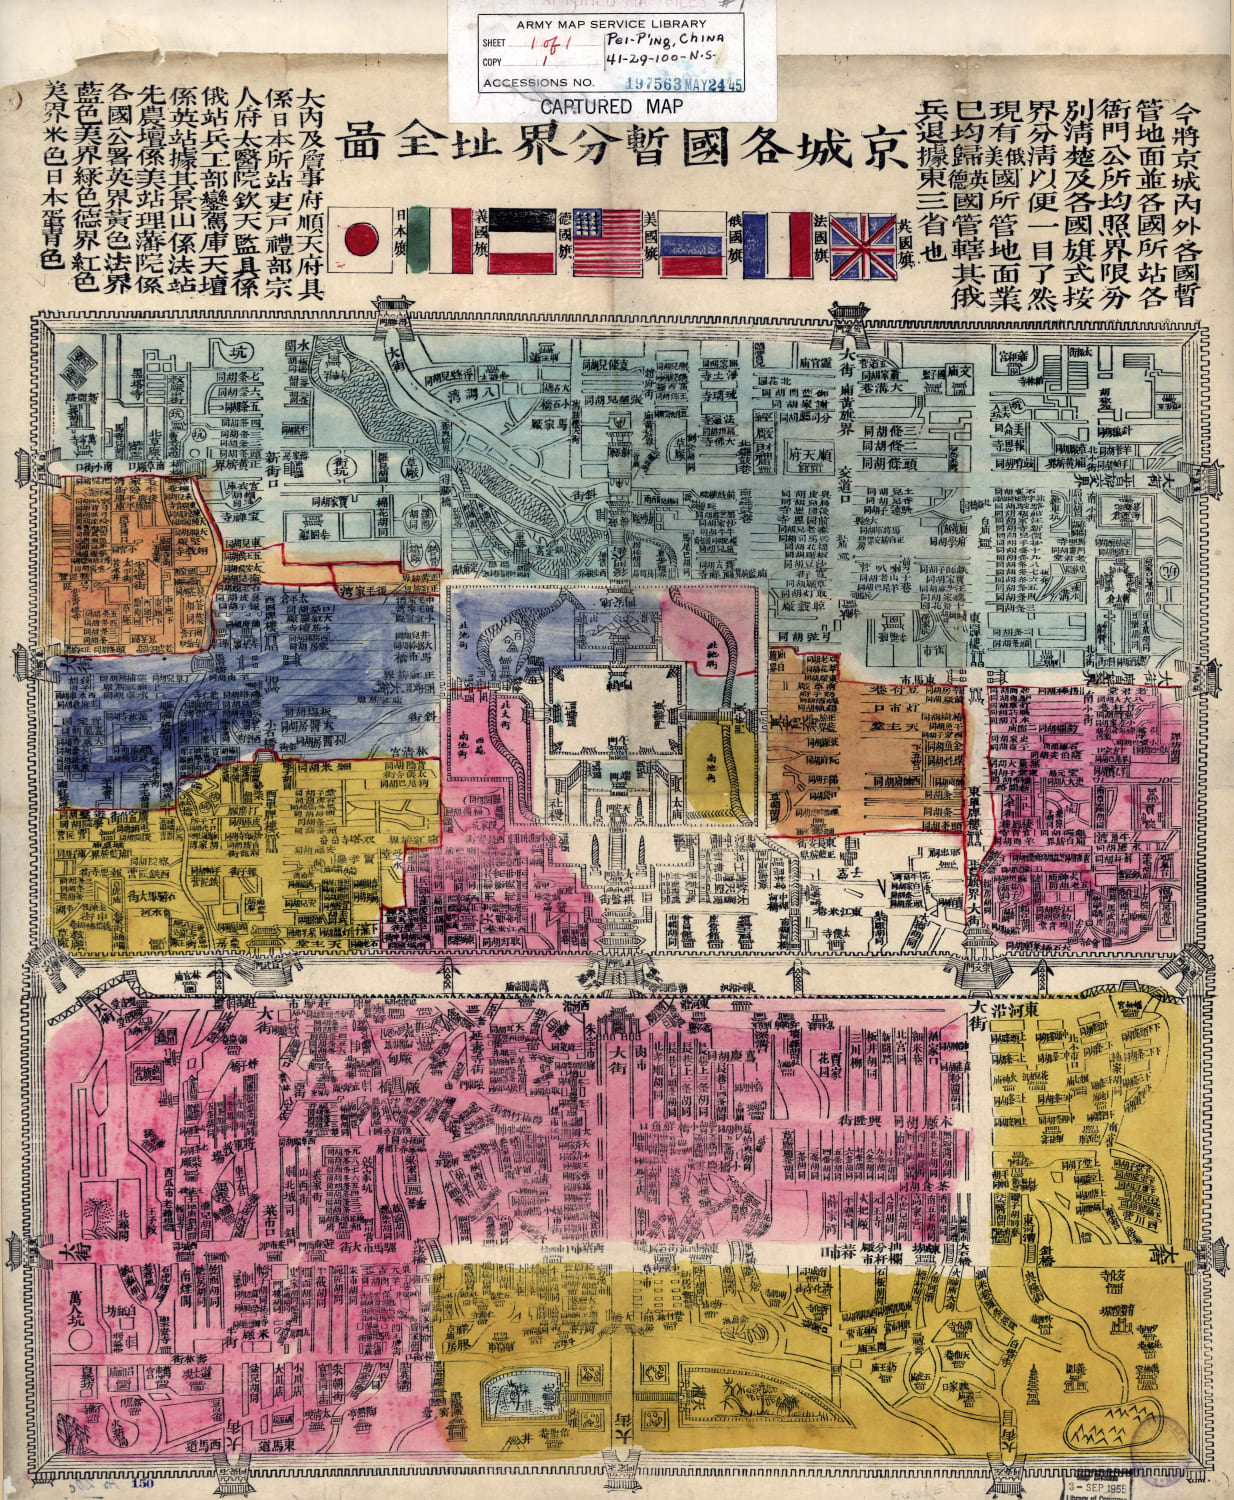 Map of Beijing showing British legation quarter (yellow), French (blue), U.S. (green and ivory), German (red), and Japanese (light green) (1900?)